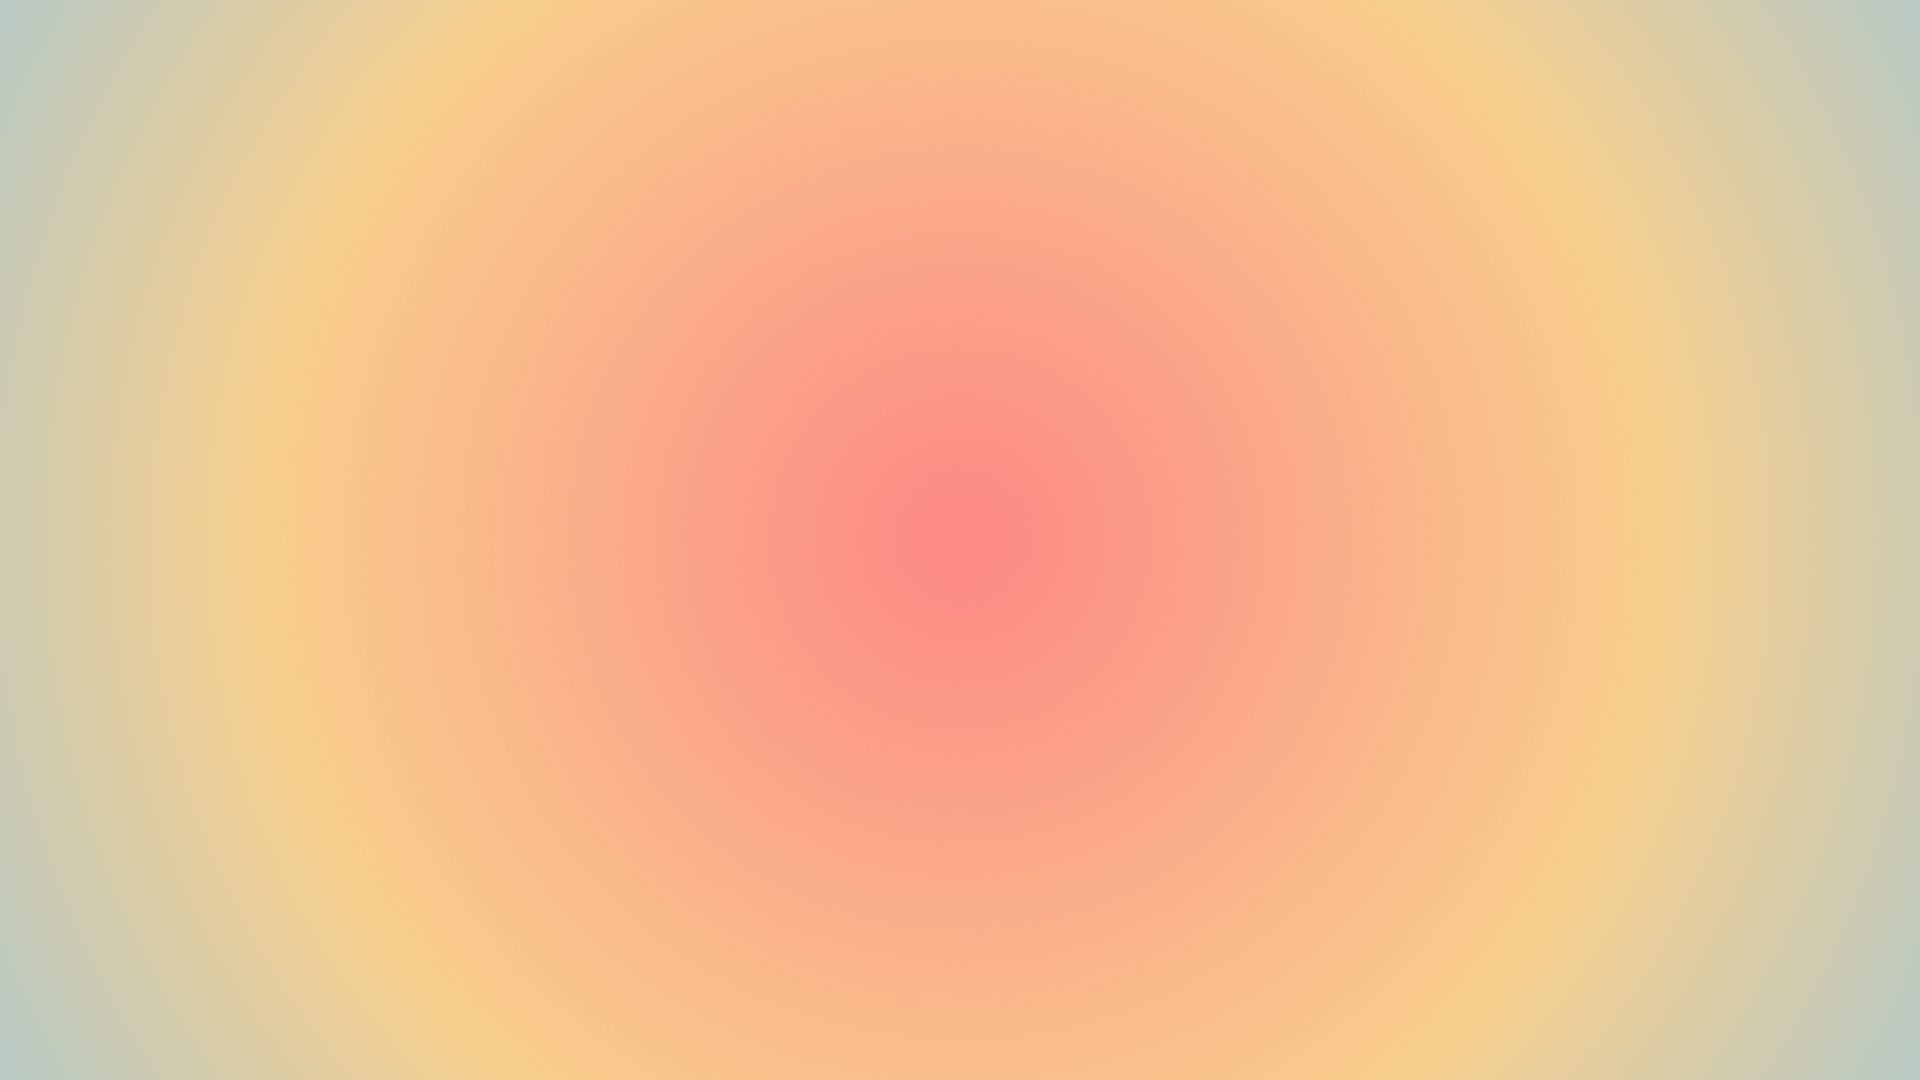 A pink, yellow, and blue radial gradient.